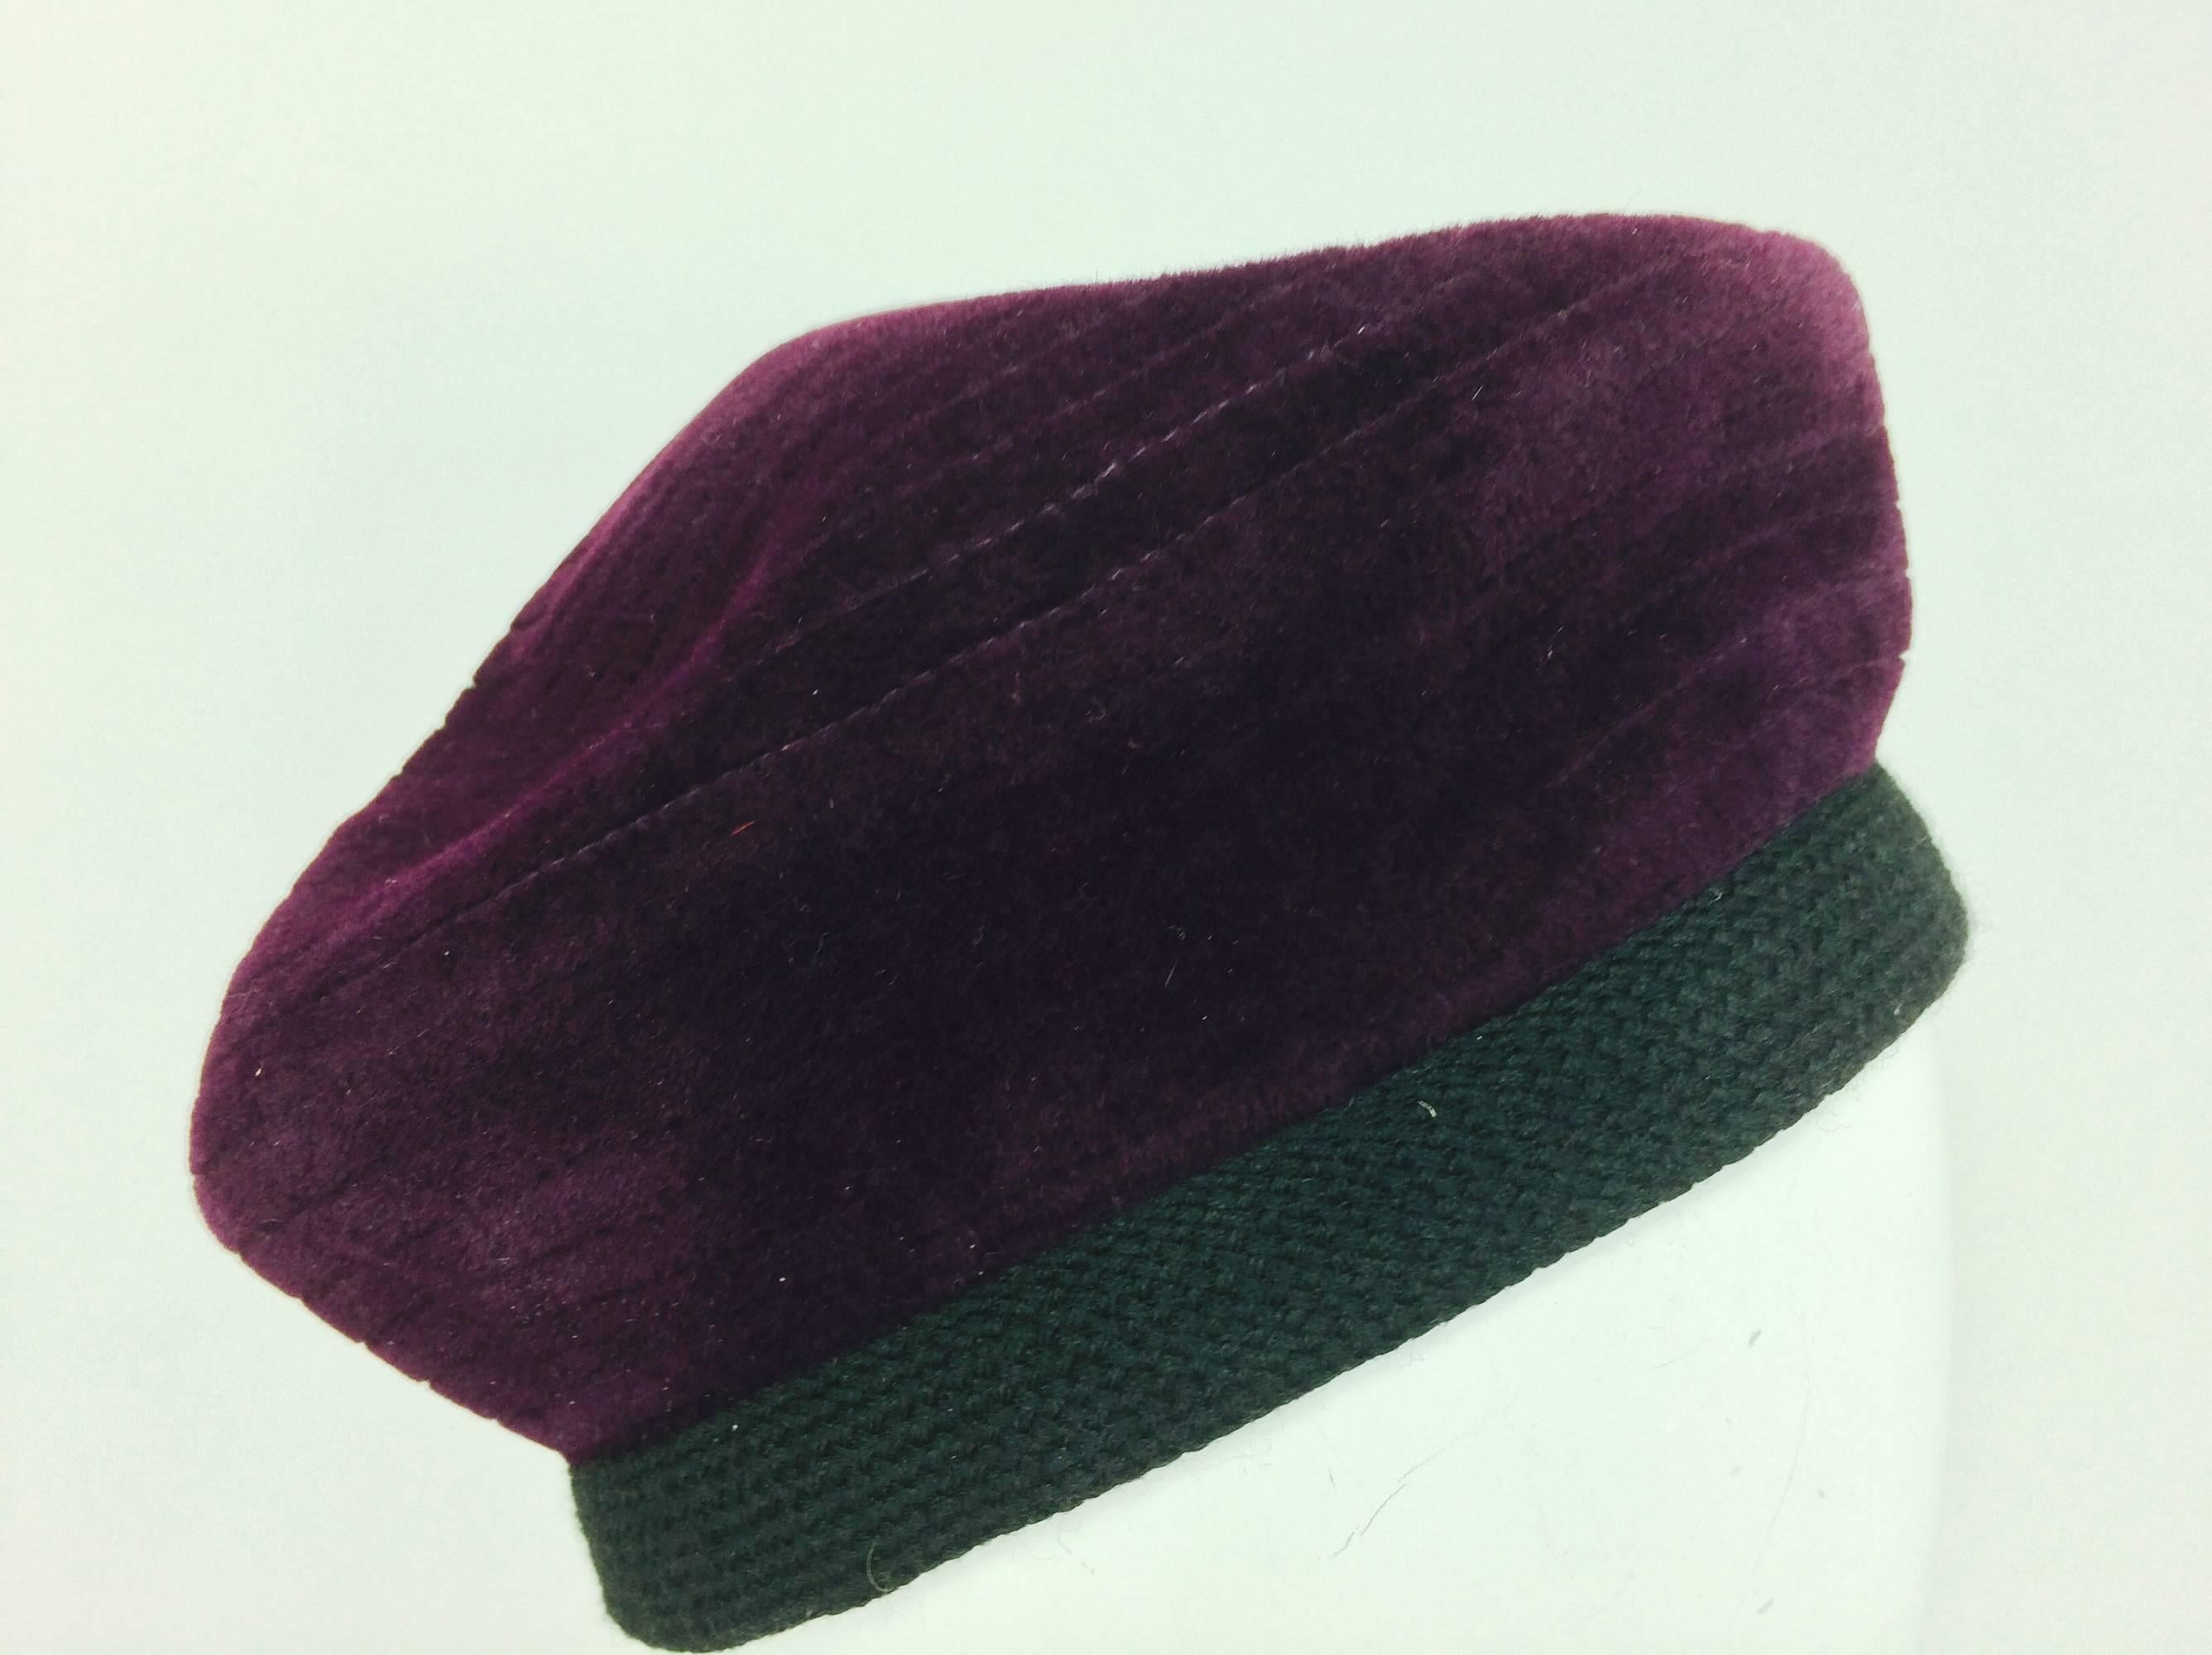 Givenchy aubergine velvet beret with feathers 1960s...Top stitched concentric circles at the crown...Head band of black braid band with pheasant feather applique at the side...Unlined & unworn, from the estate of Betsy Kaiser...Approximately 22 1/2